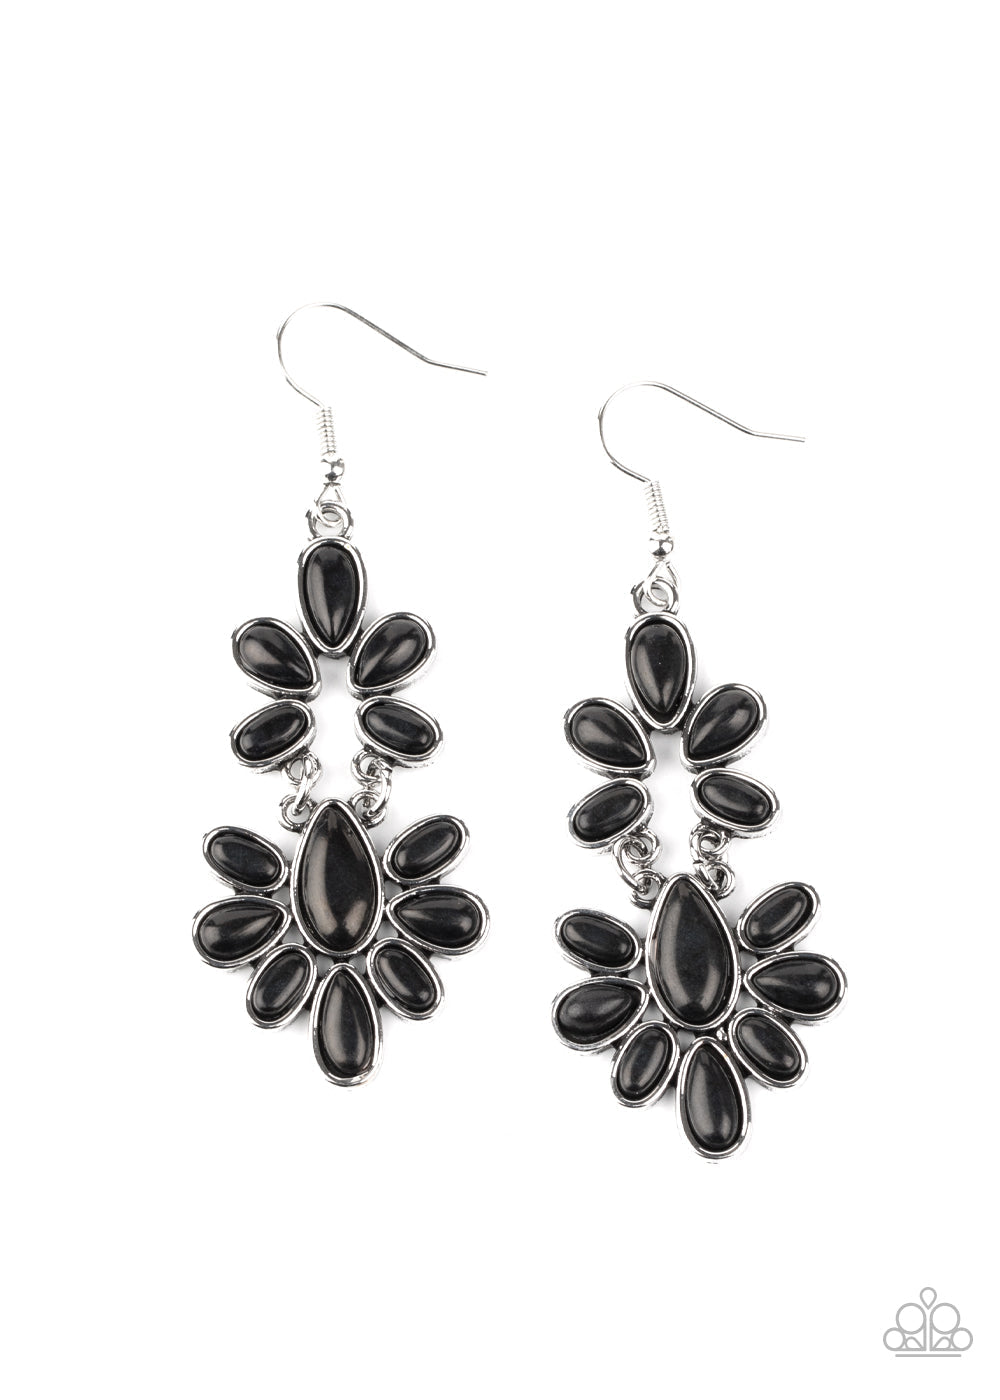 Cactus Cruise - Black and Silver Earrings - Paparazzi Accessories - Sleek silver frames, earthy black stone teardrop frames delicately link into a wildly wonderfully floral pattern earrings. Earring attaches to a standard fishhook fitting.